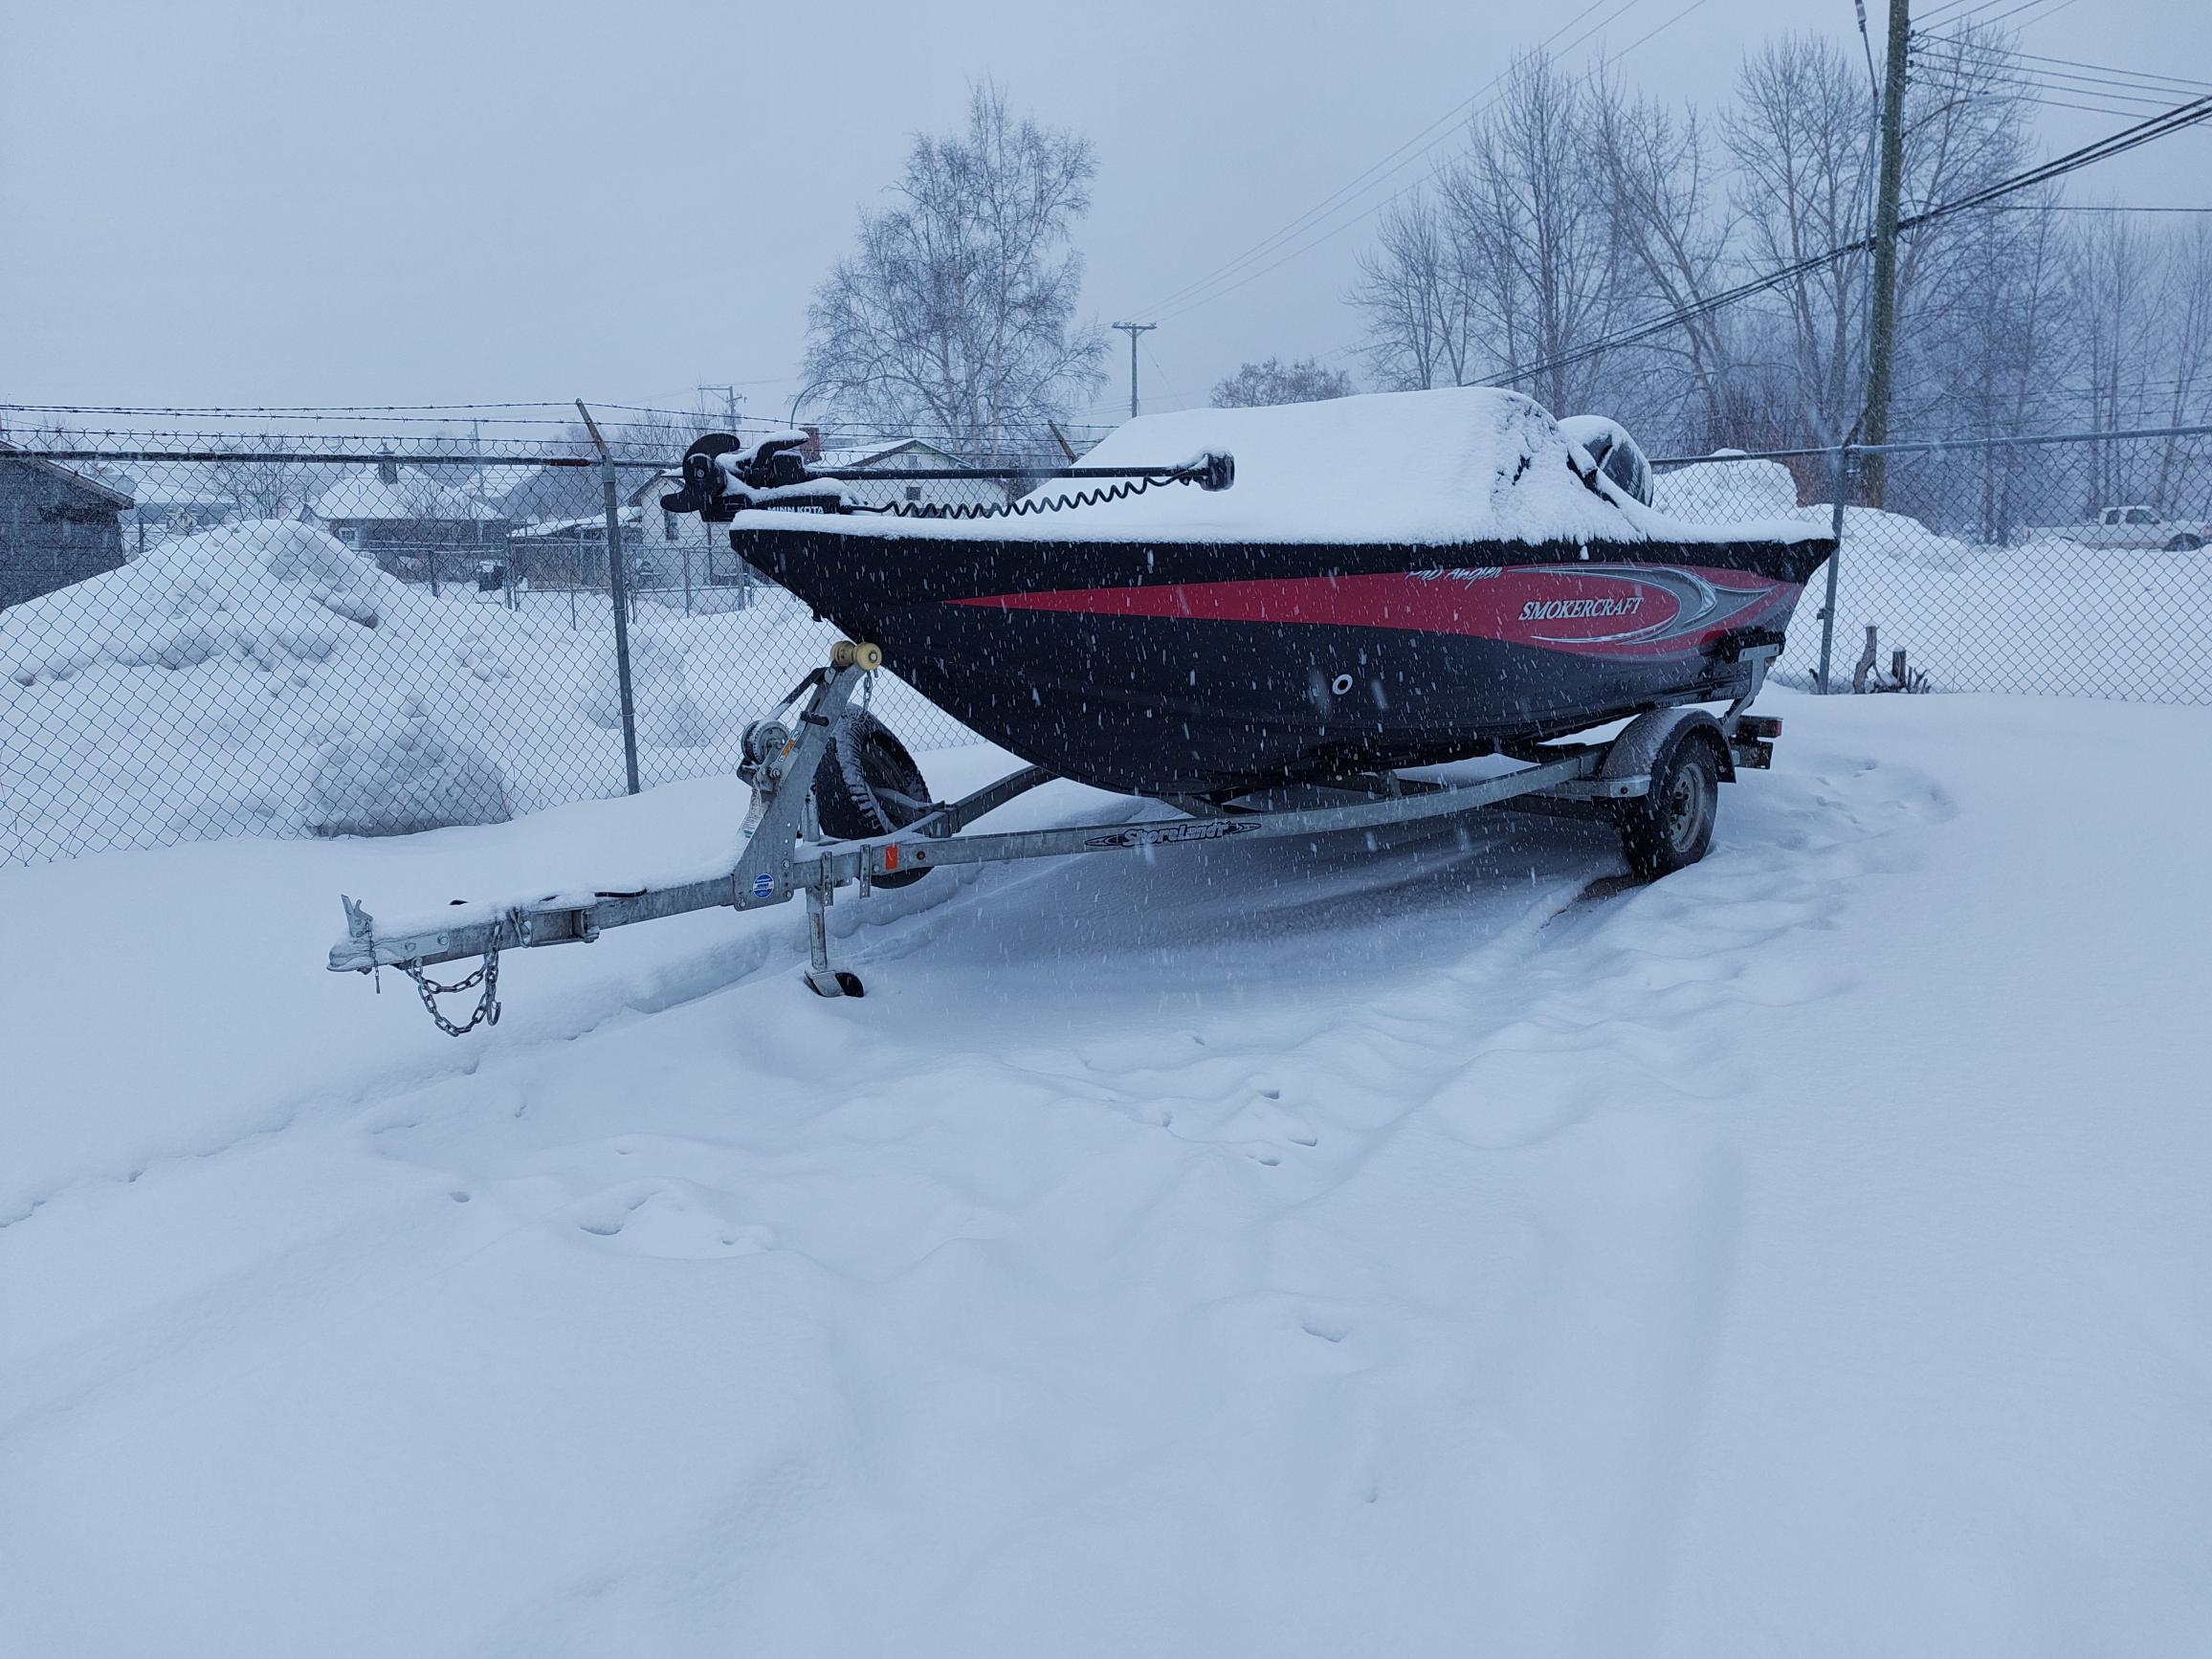 2019 Smokercraft 172 Pro Angler #B-PG-0746 Located in Prince George